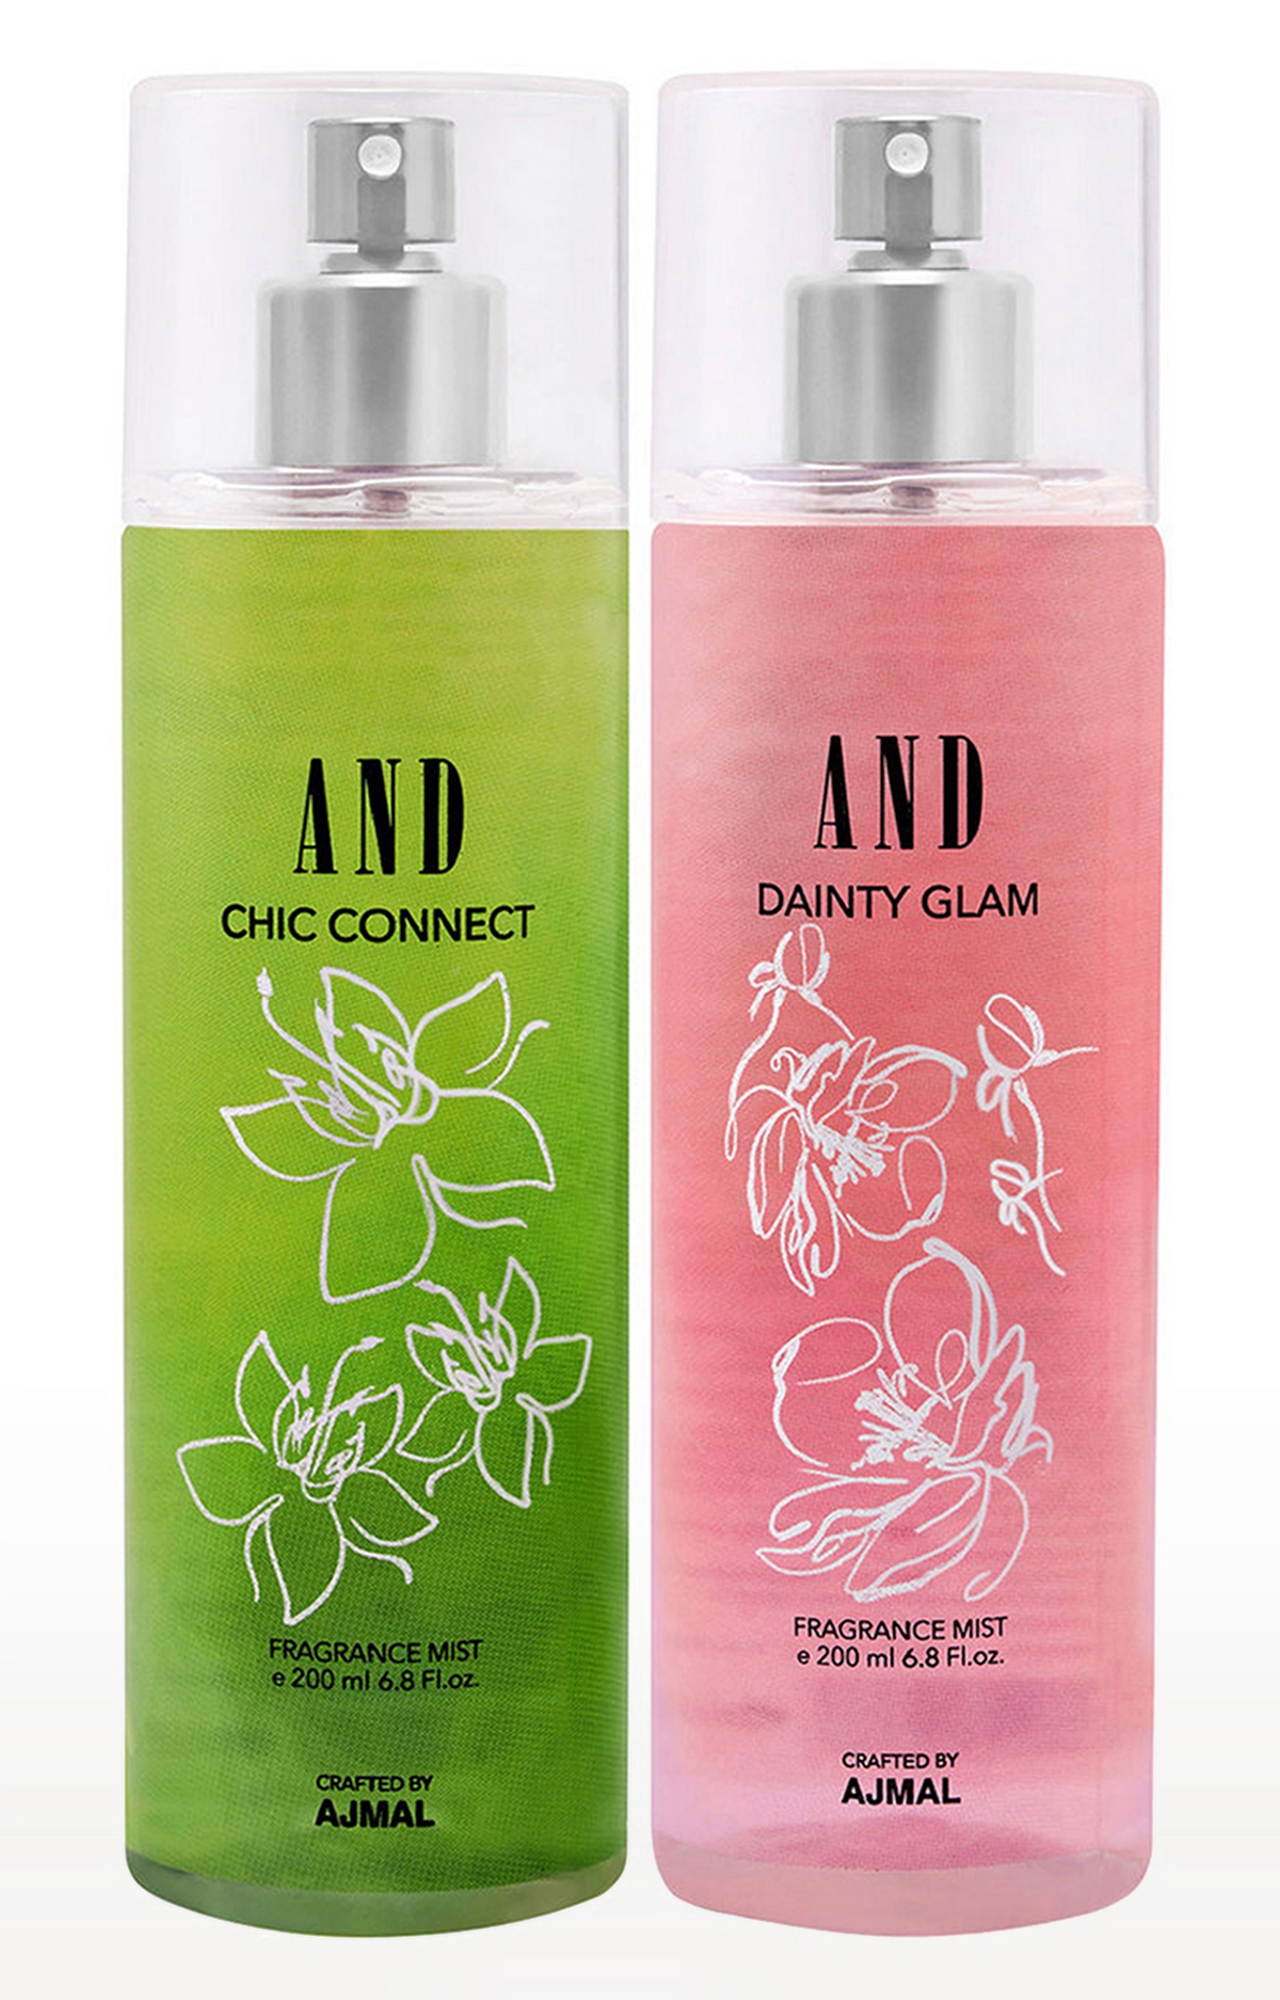 AND Chic Connect & Dainty Glam Pack of 2 Body Mist 200ML each Long Lasting Scent Spray Gift For Women Perfume Crafted by Ajmal FREE